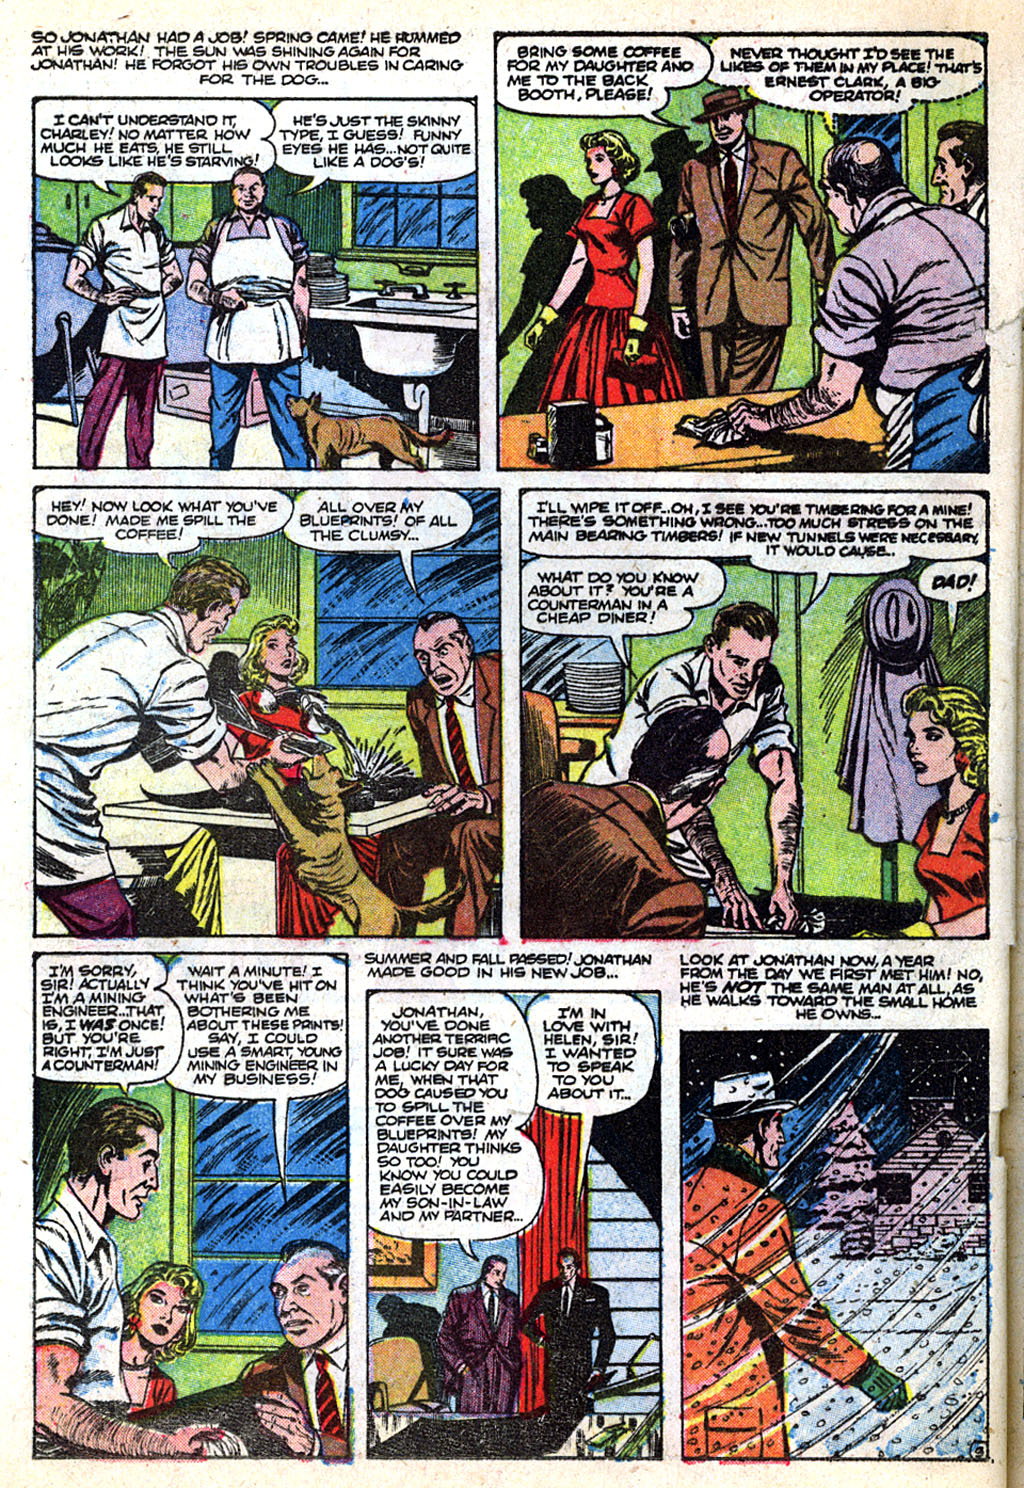 Marvel Tales (1949) 137 Page 23